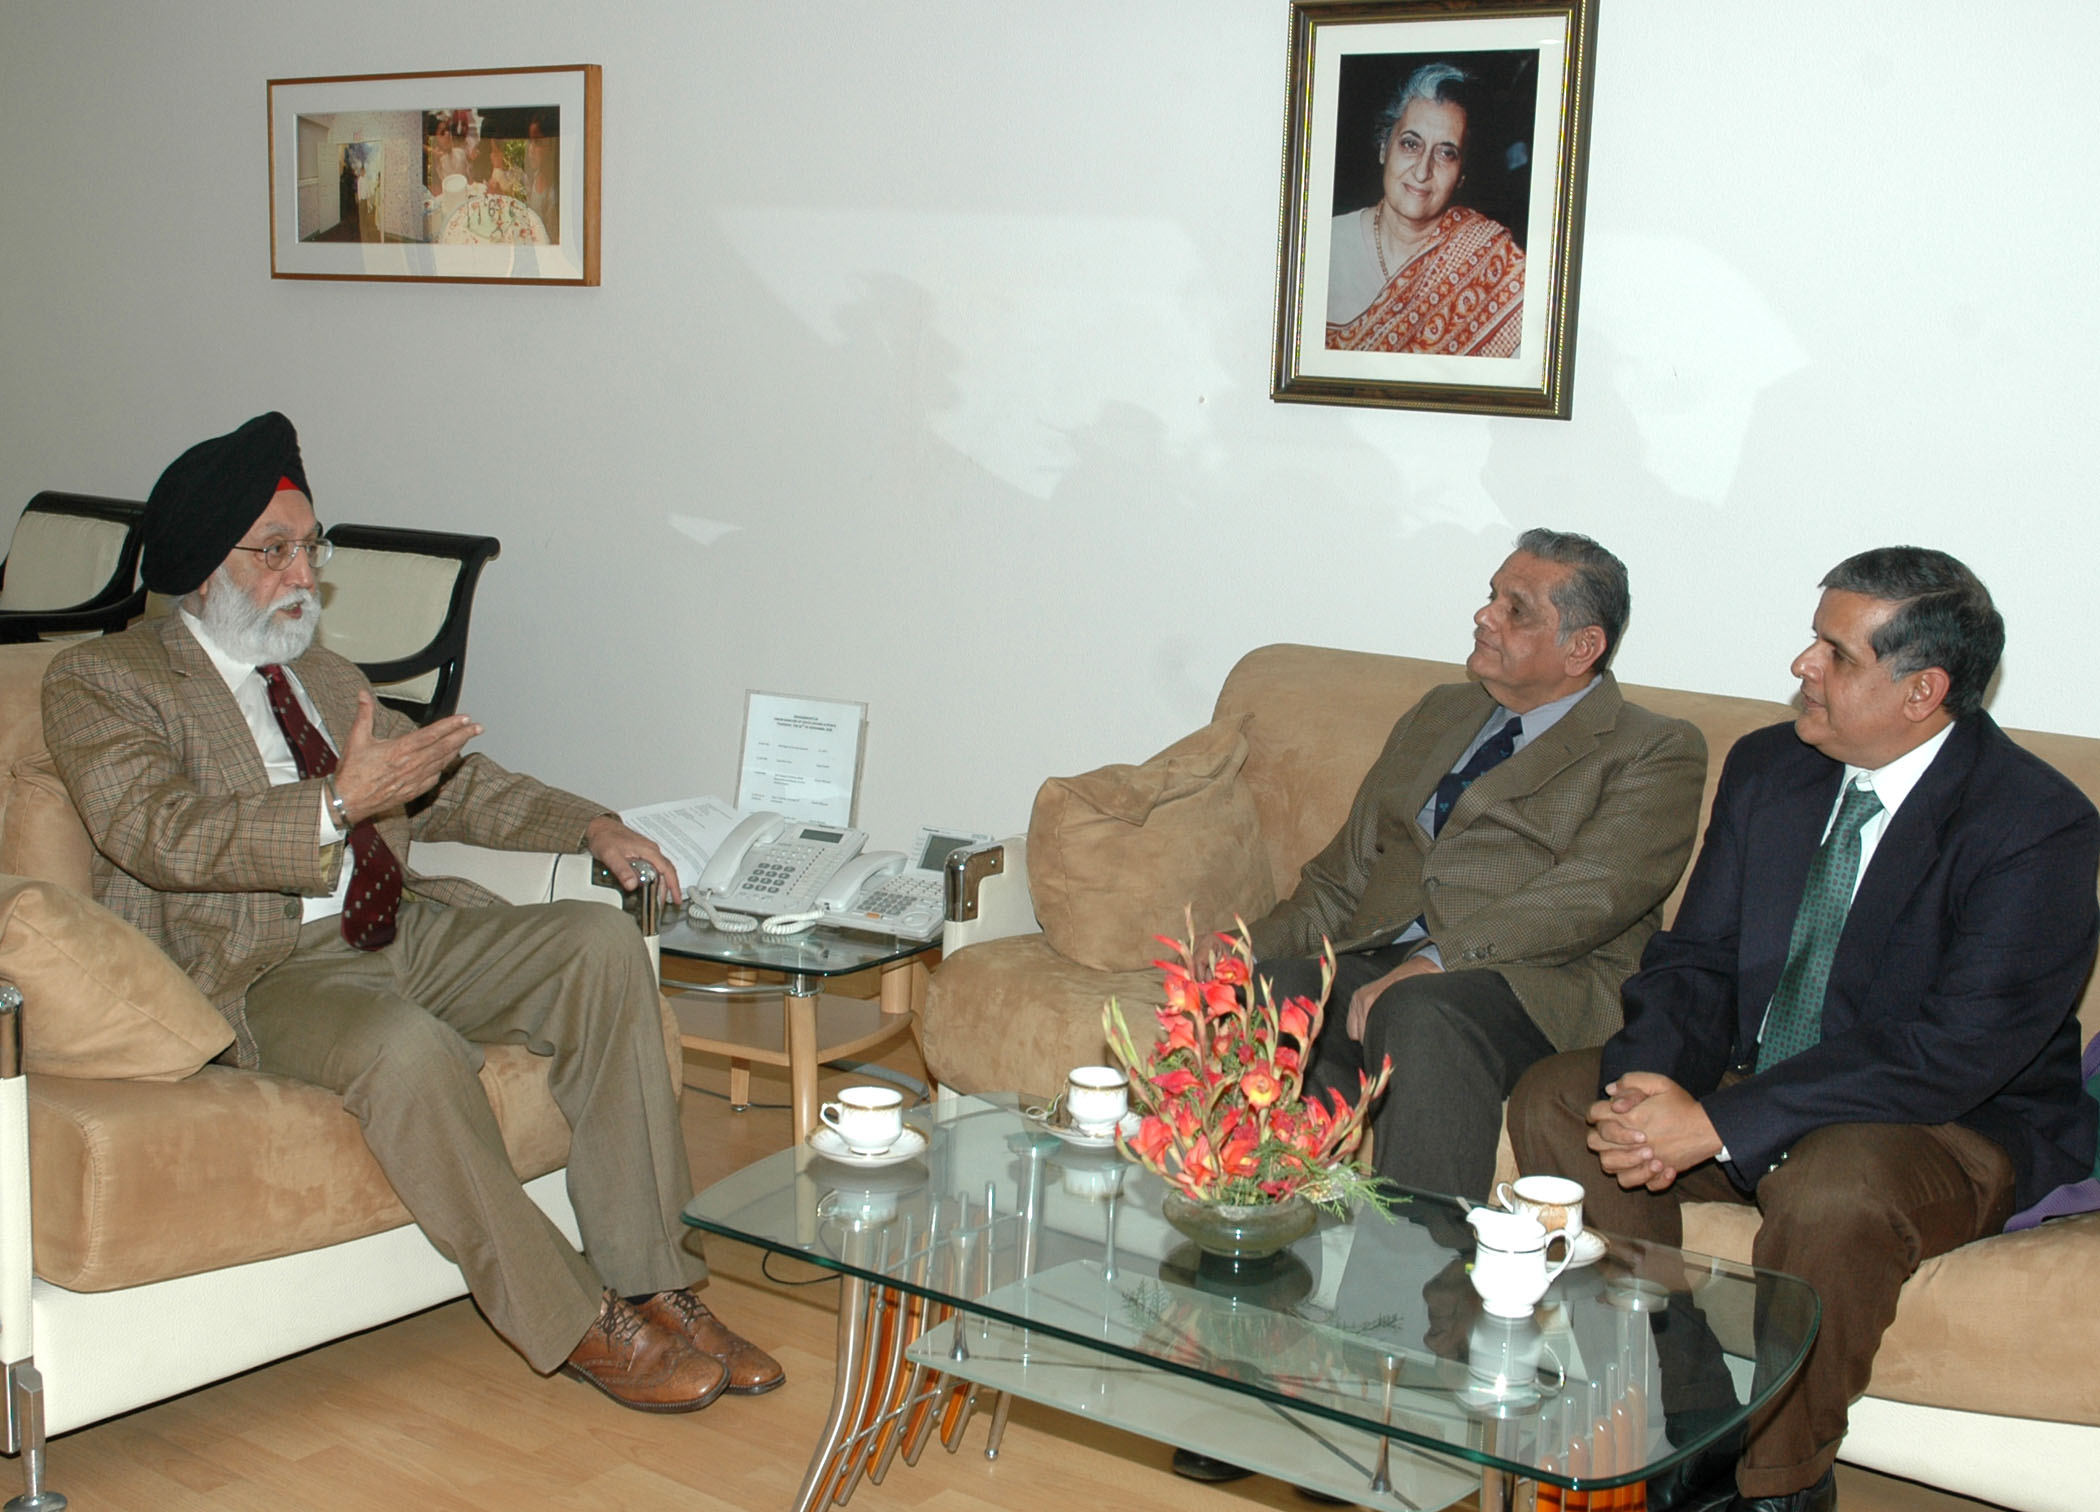 Ramanathan Krishnan and Ramesh Krishnan called on the Union Minister of Youth Affairs and Sports, Dr. M.S. Gill, in New Delhi, 26 November 2009.